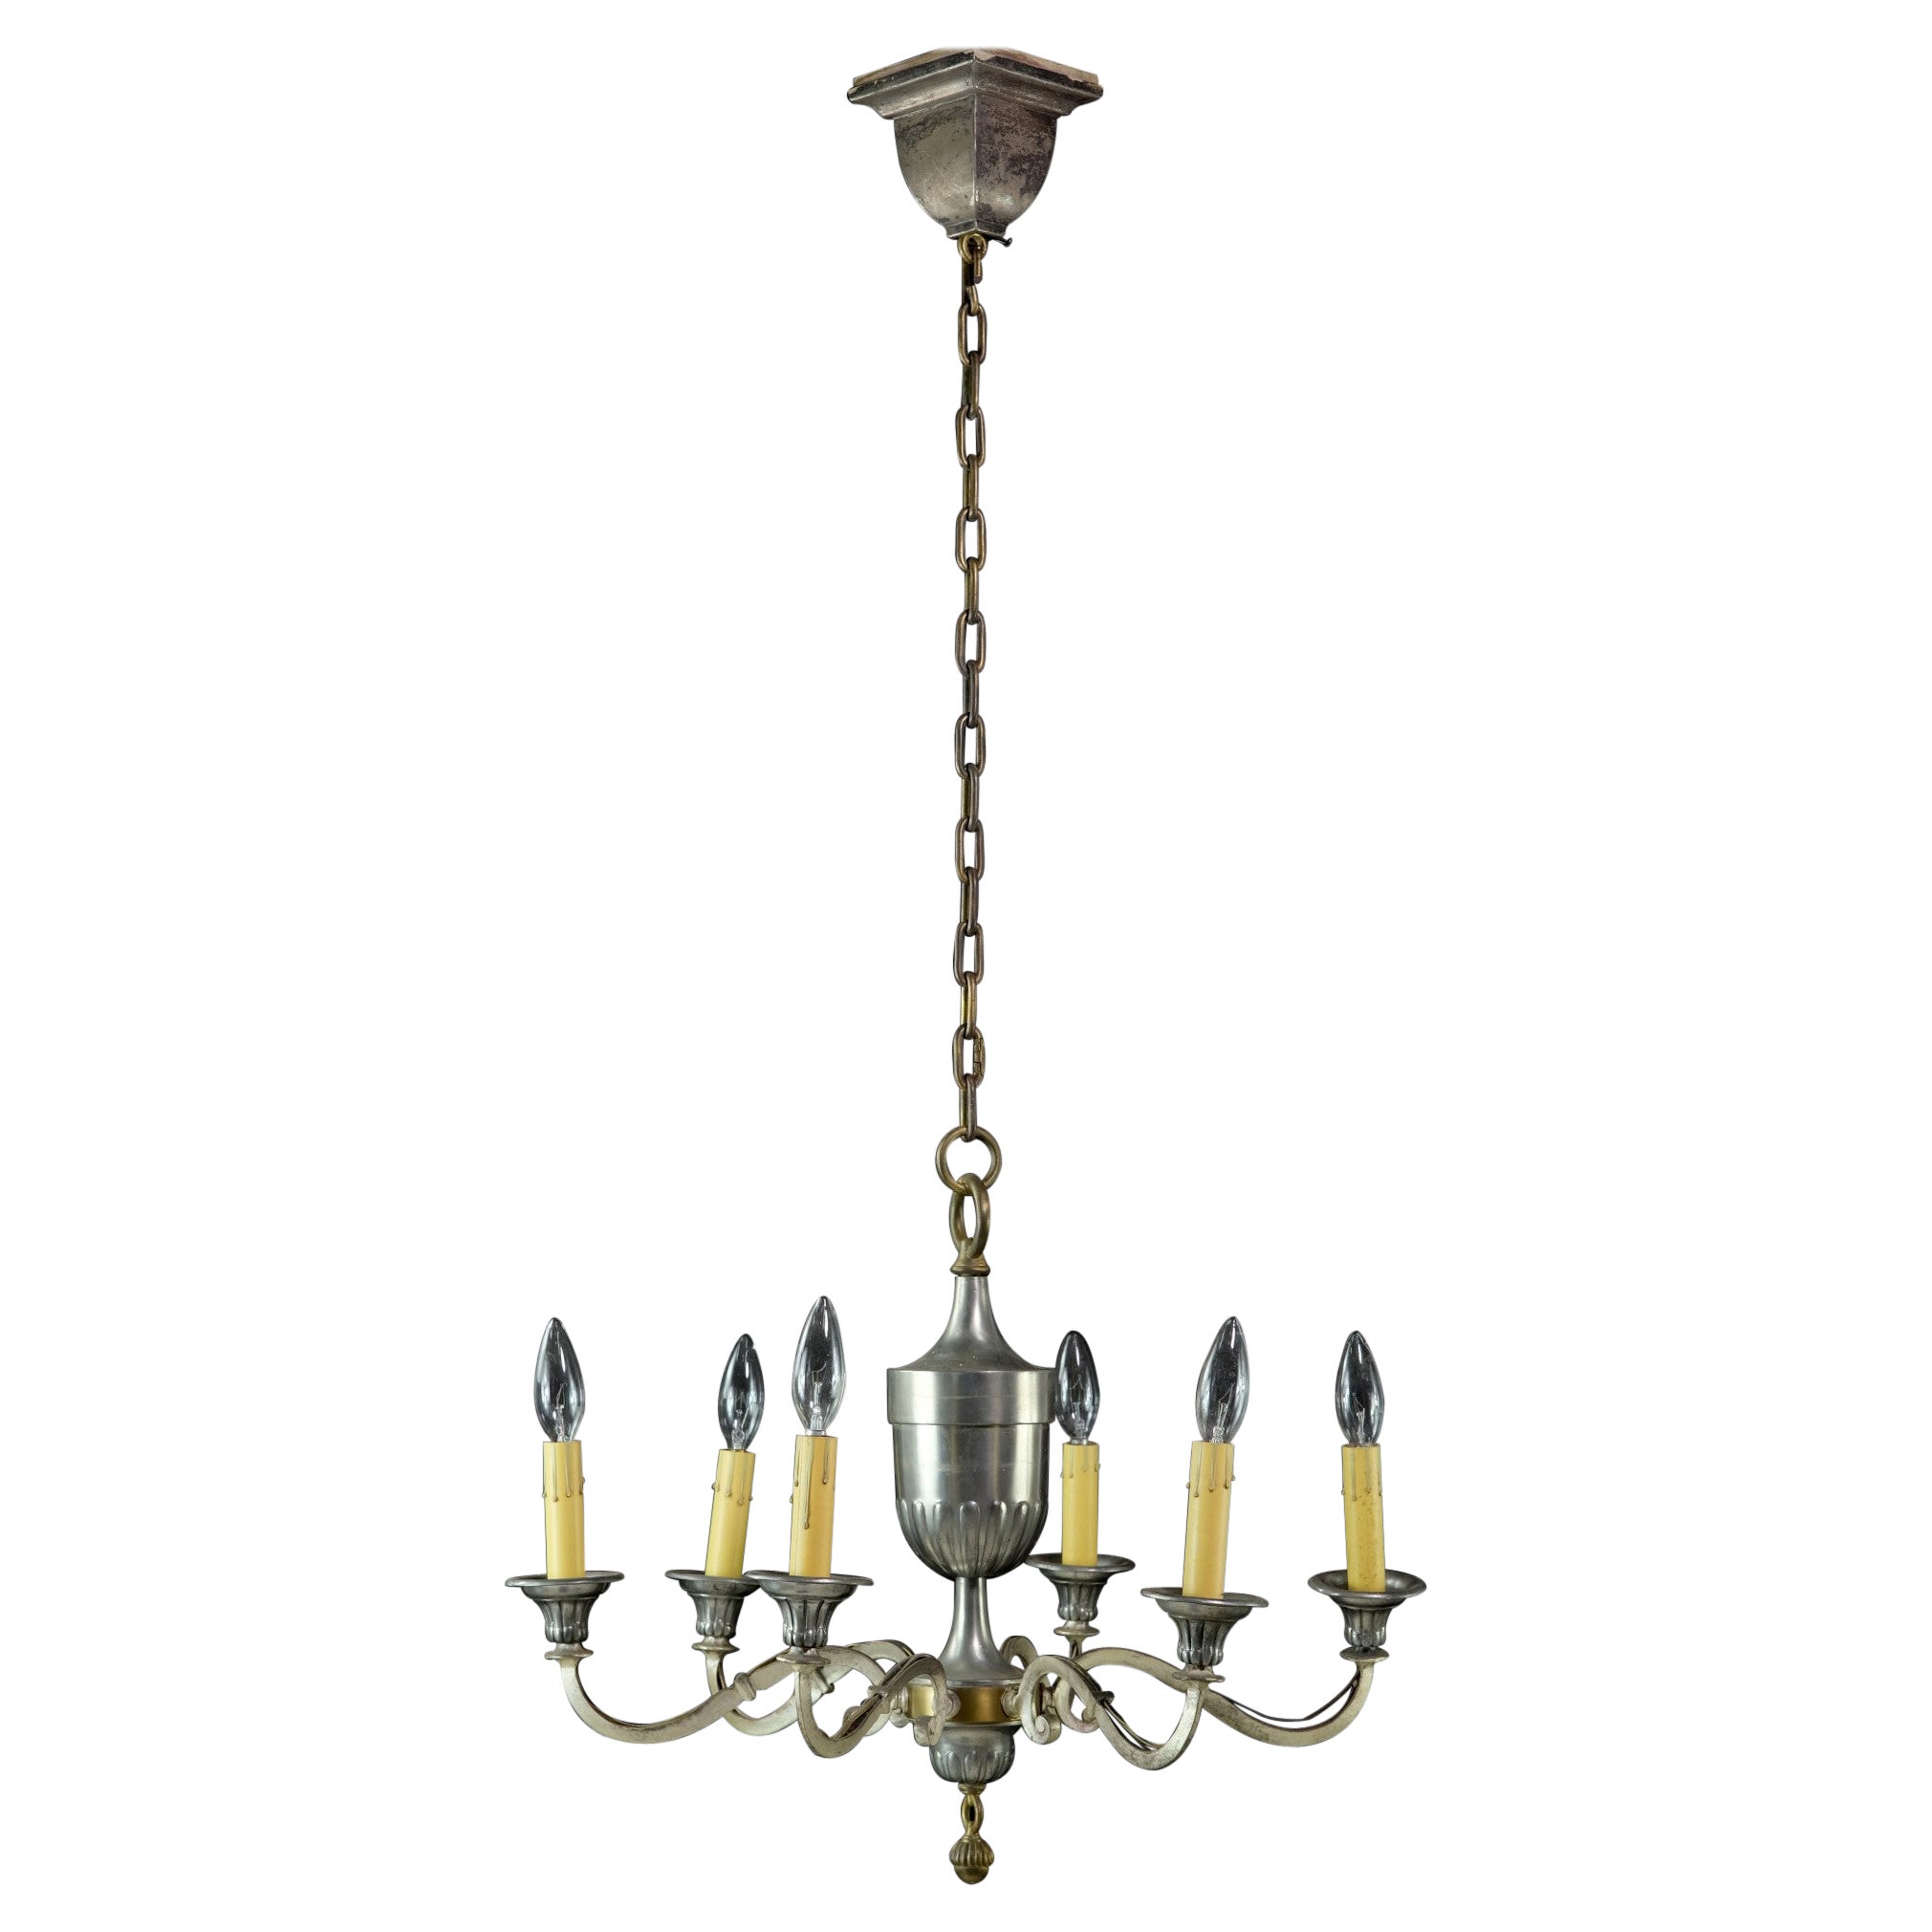 1940s Federal Style 6-Arm Brass Chandelier Nickel Plated with Original Patina For Sale